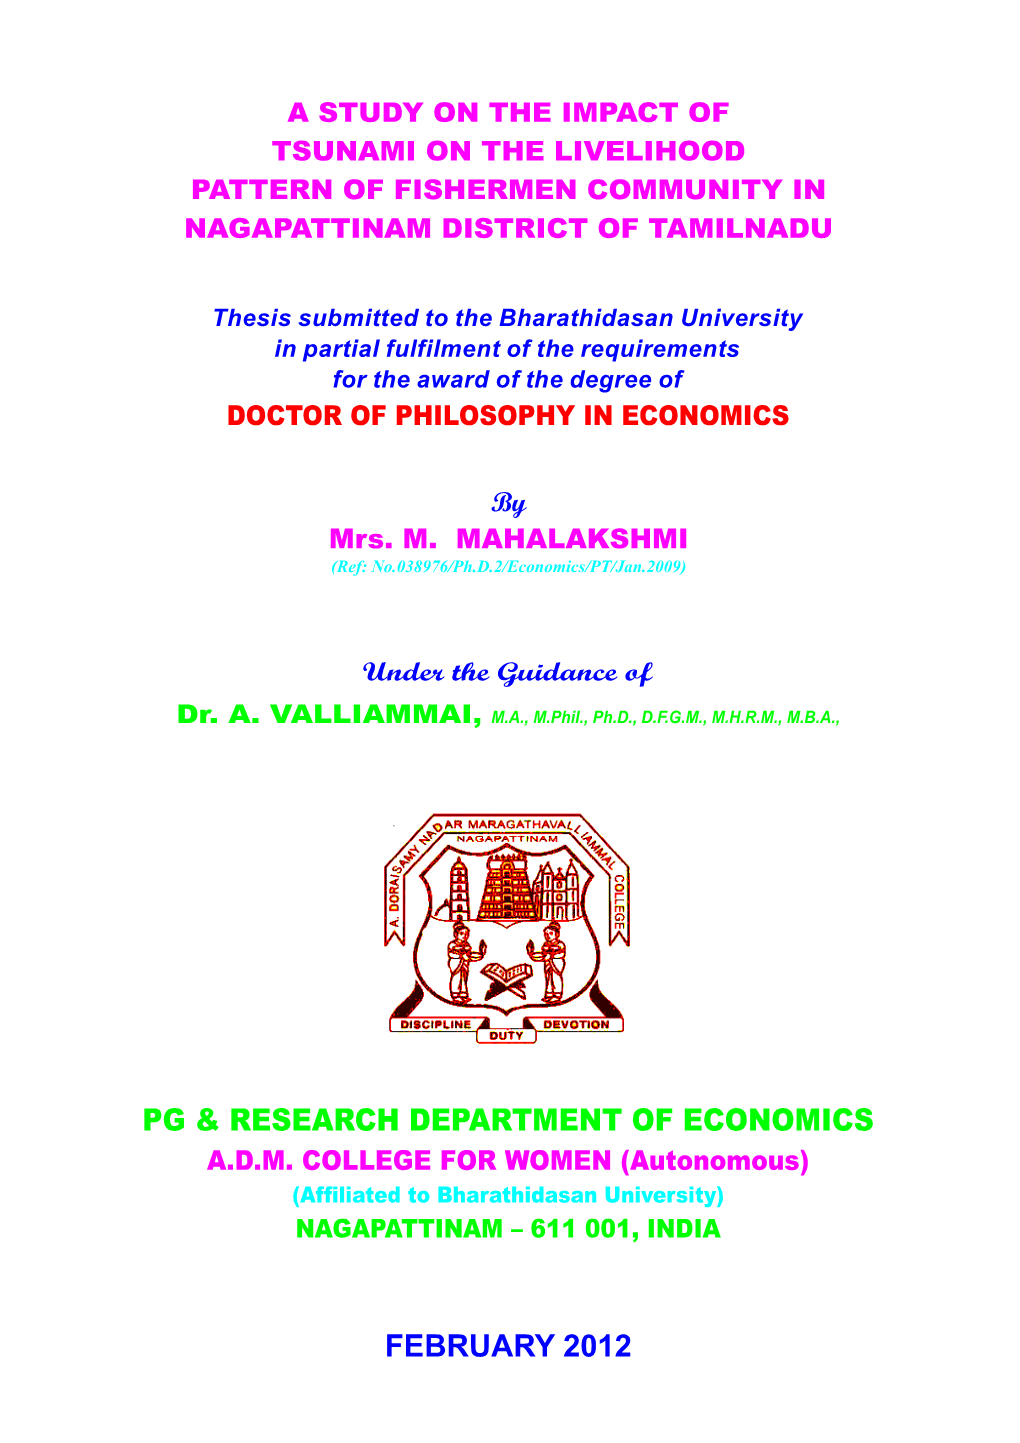 Thesis Submitted to the Bharathidasan University in Partial Fulfilment of the Requirements for the Award of the Degree of Dr